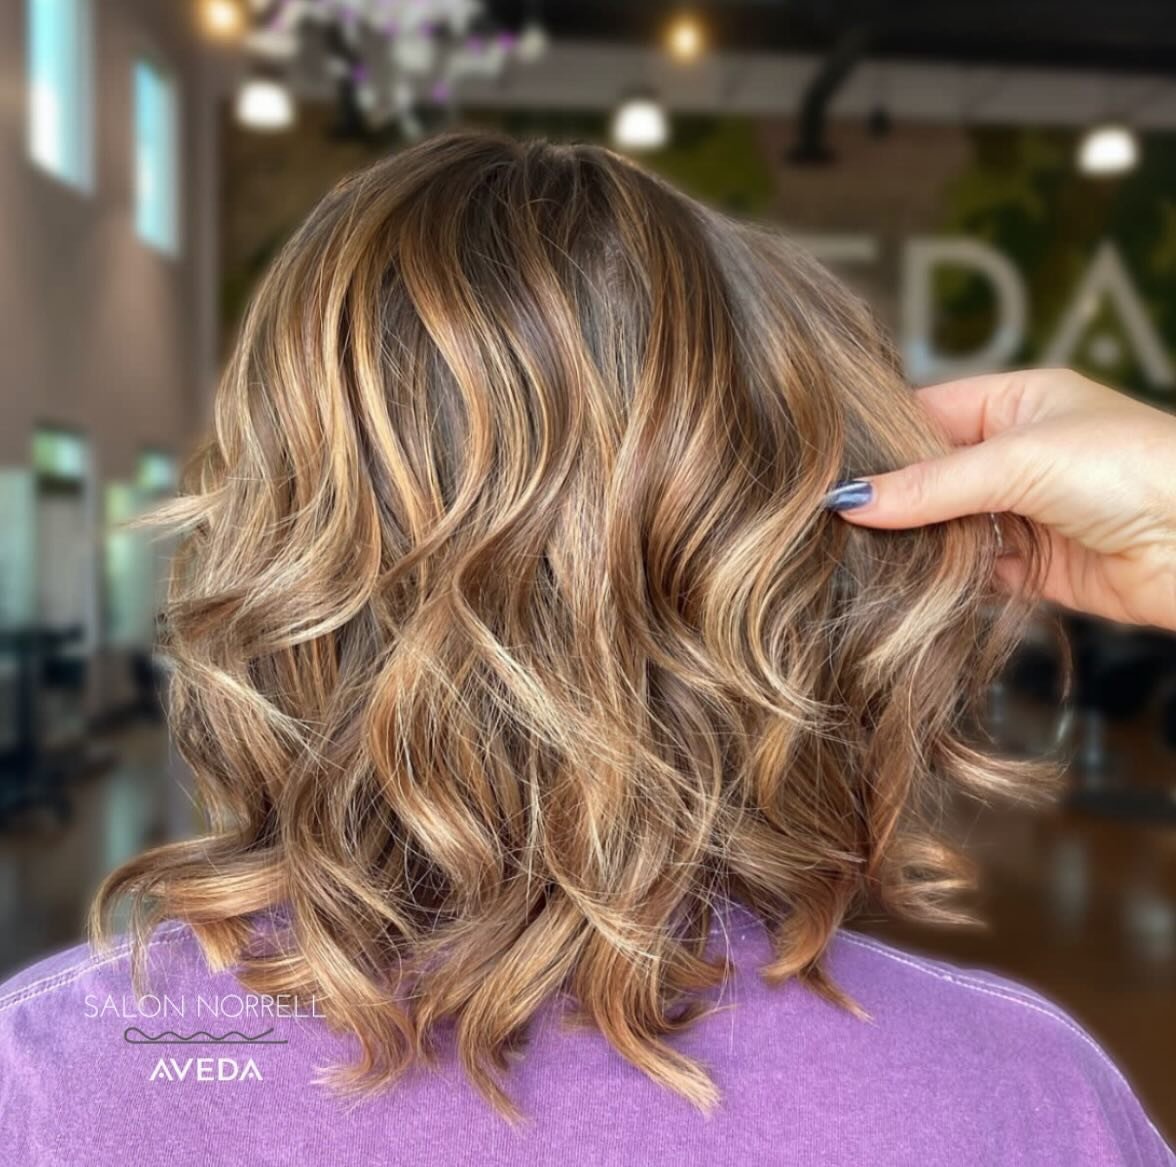 Hair | jessica 
Make your reservation today! 
🗓Reservations are best 
📲Text 813-590-6765 
☎️Call 813-265-2000 
🔗 Link in bio to book online 
💻TampaAveda.com 
📍Tampa, Florida 
🏷 tag us #salonnorrell